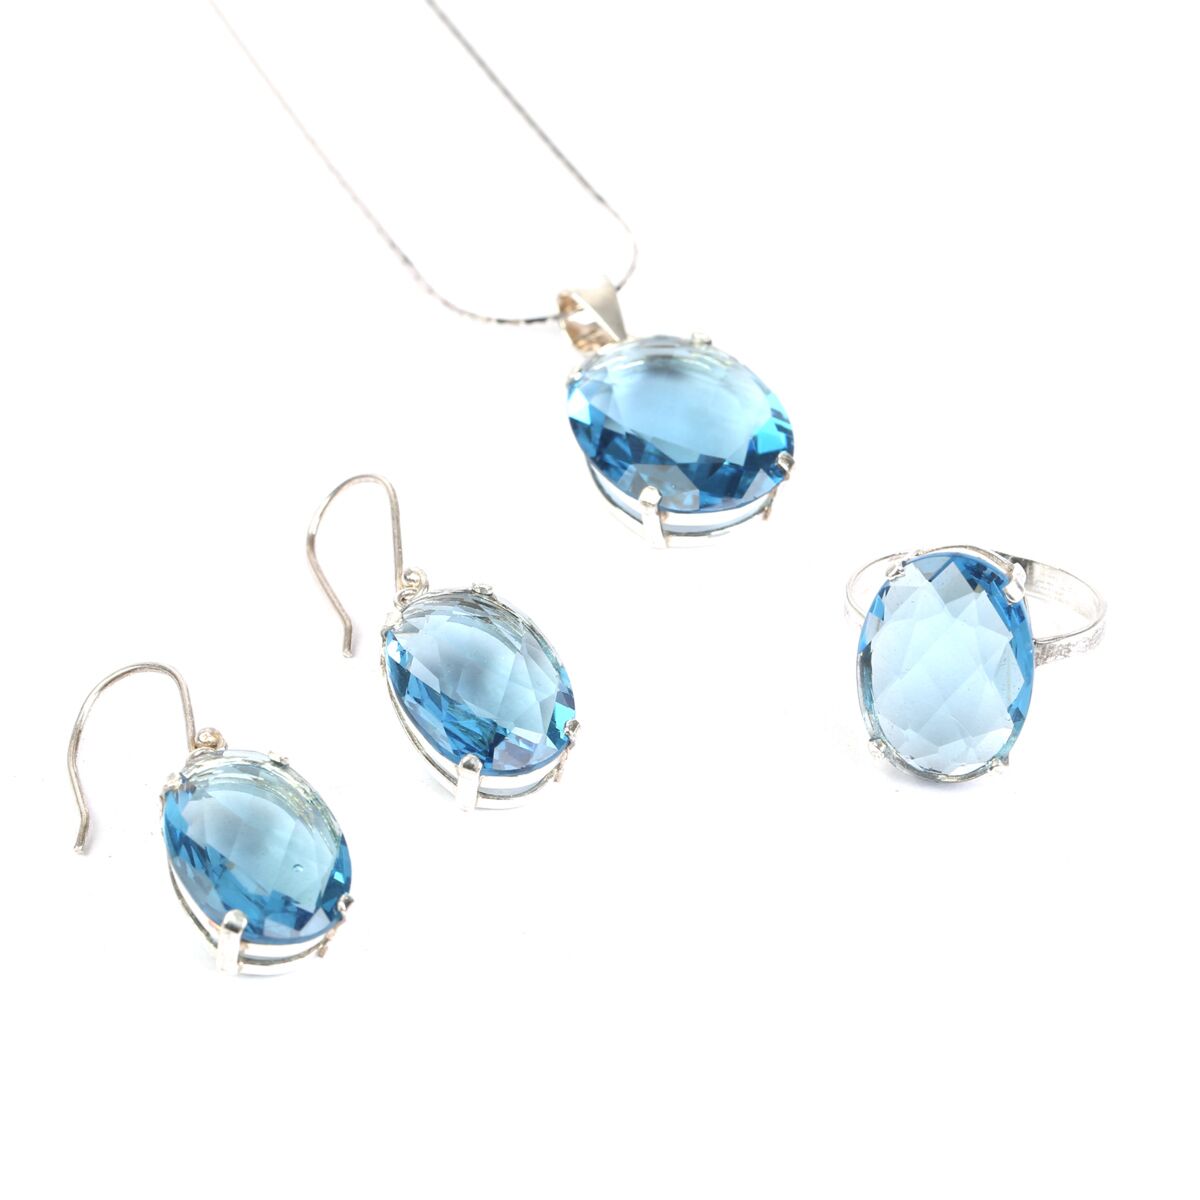 Rare Blue Topaz Complete Set | Women Necklace, Ring, and Earrings | Handmade jewelry